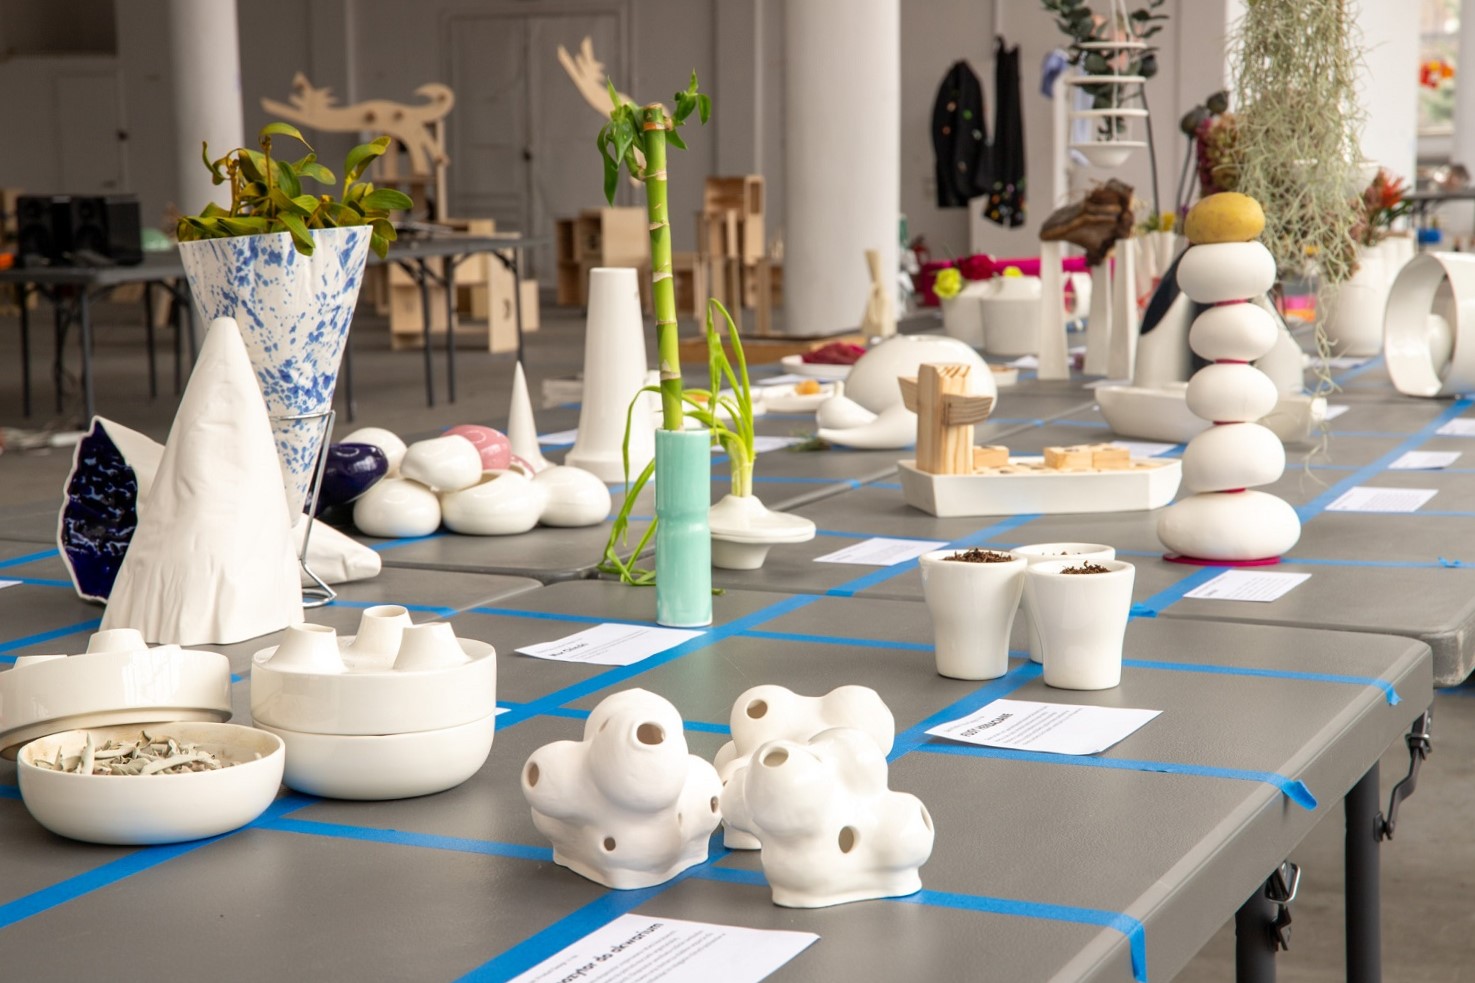 Pottery products arranged on a table - presentation of students' work.